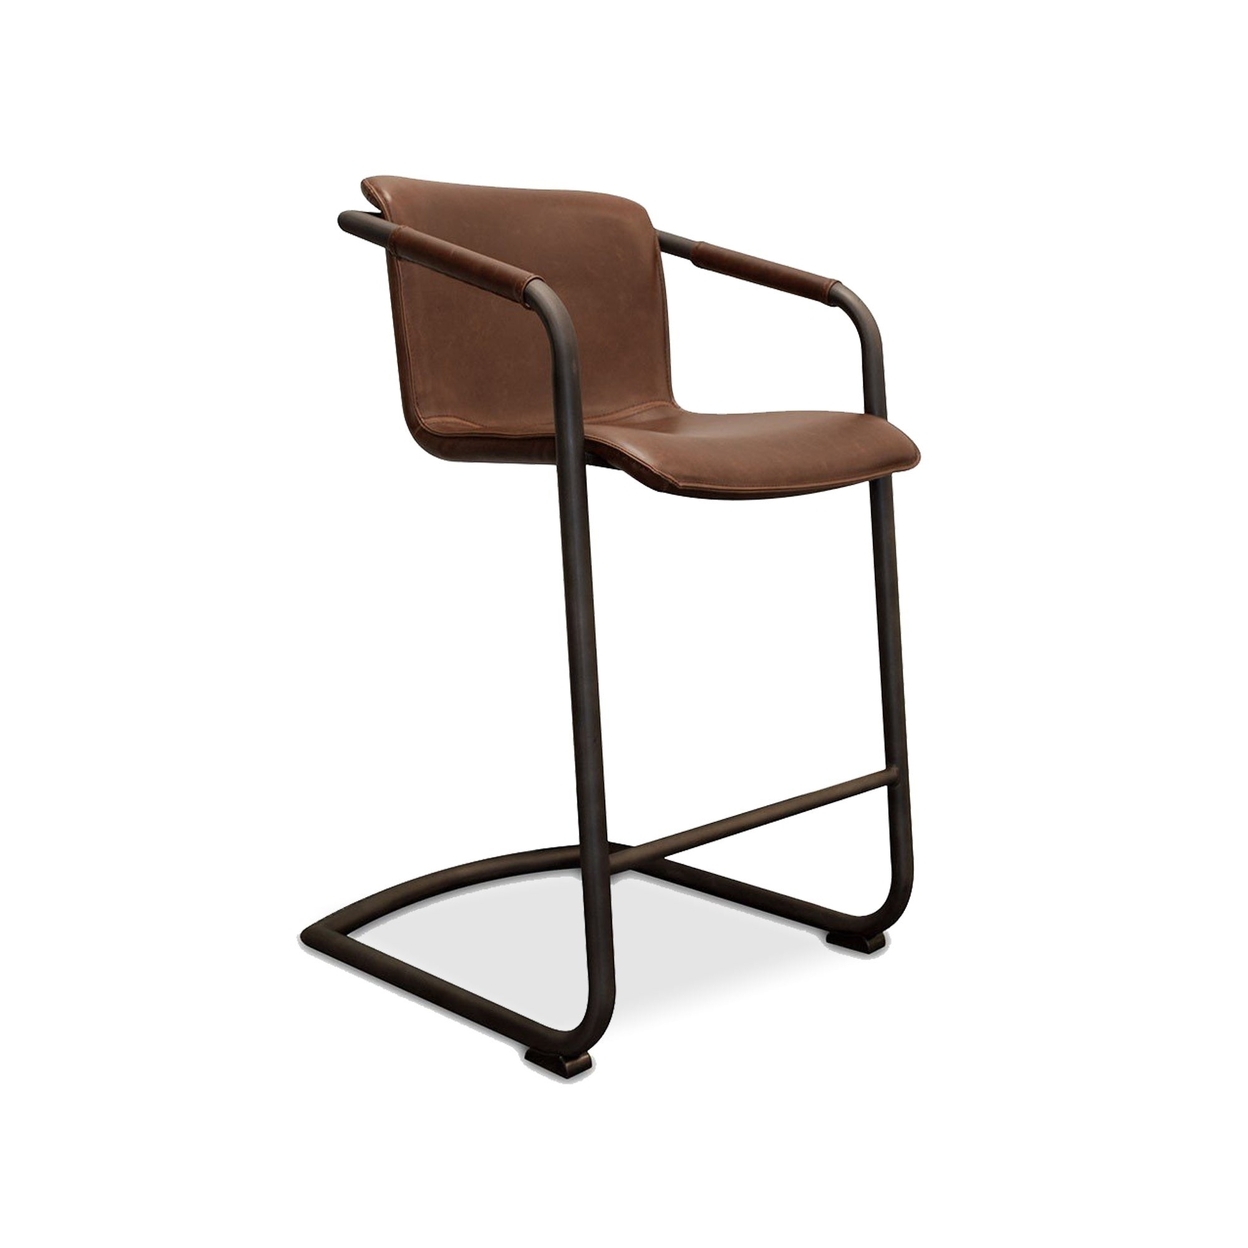 27 Inch Cantilever Counter Stool Chair, Set Of 2, Brown Vegan Faux Leather- Saltoro Sherpi